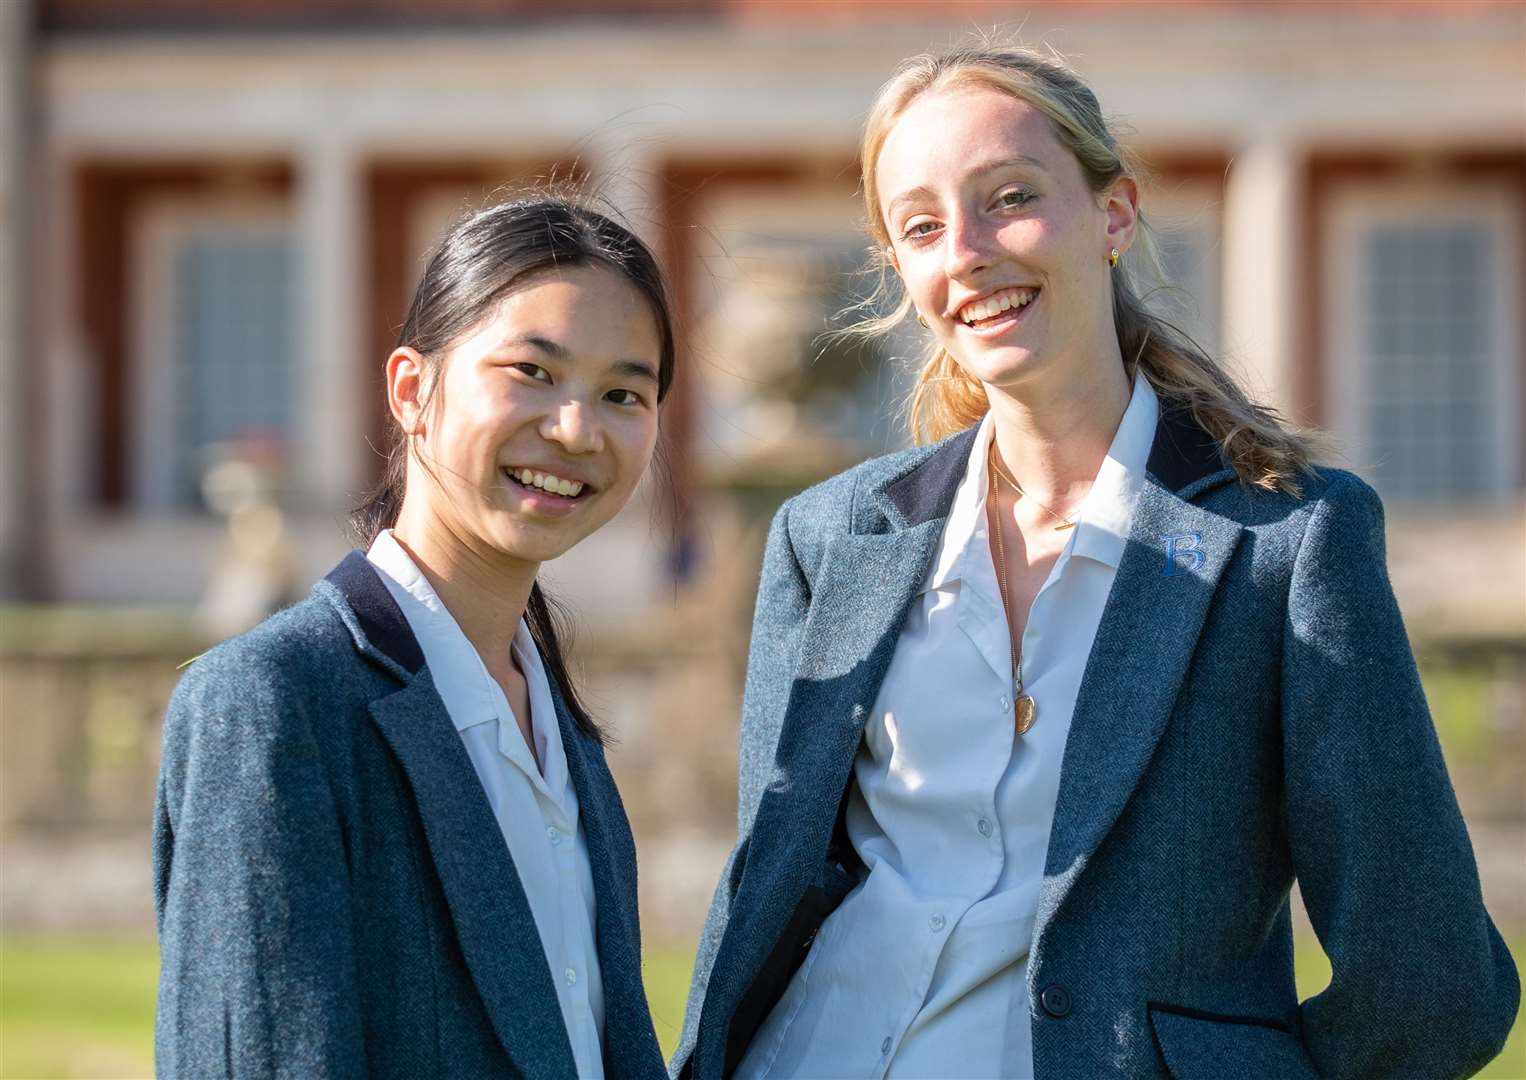 Caitlin Chiu and Carlotta Wright achieved 22 Level 9 grades between them at Benenden school